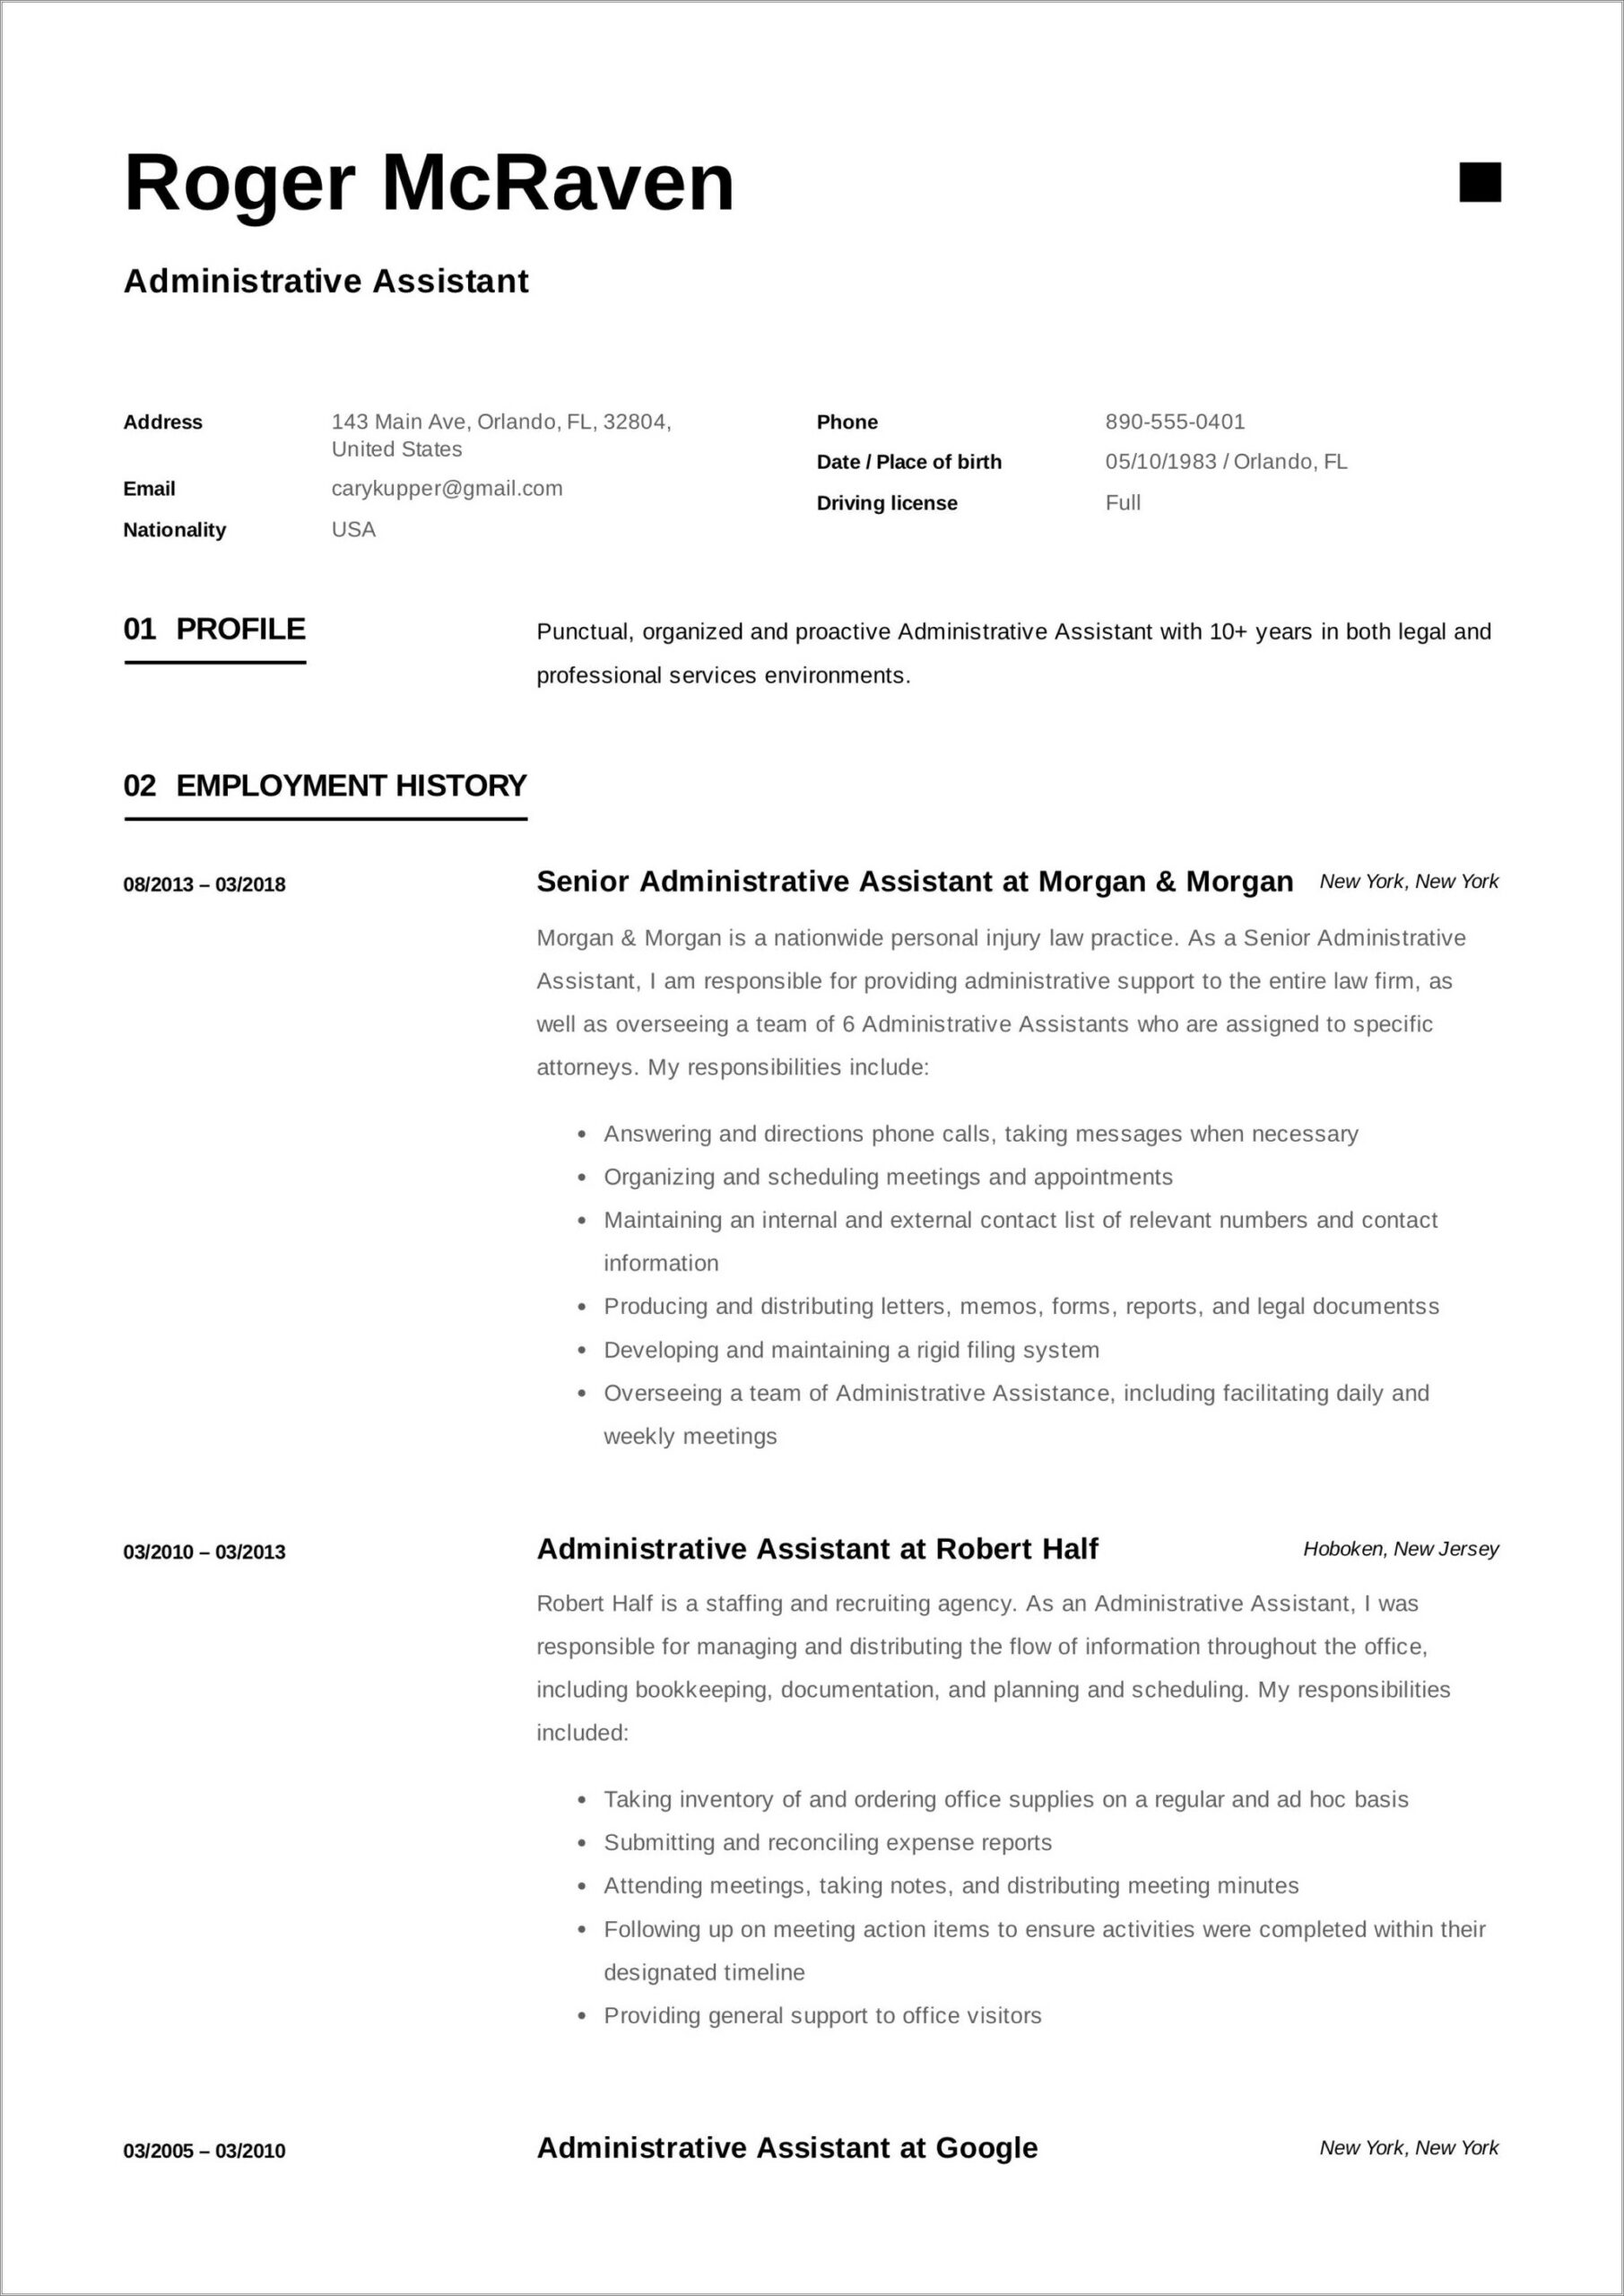 Executive Assistant Summary Section On Resume